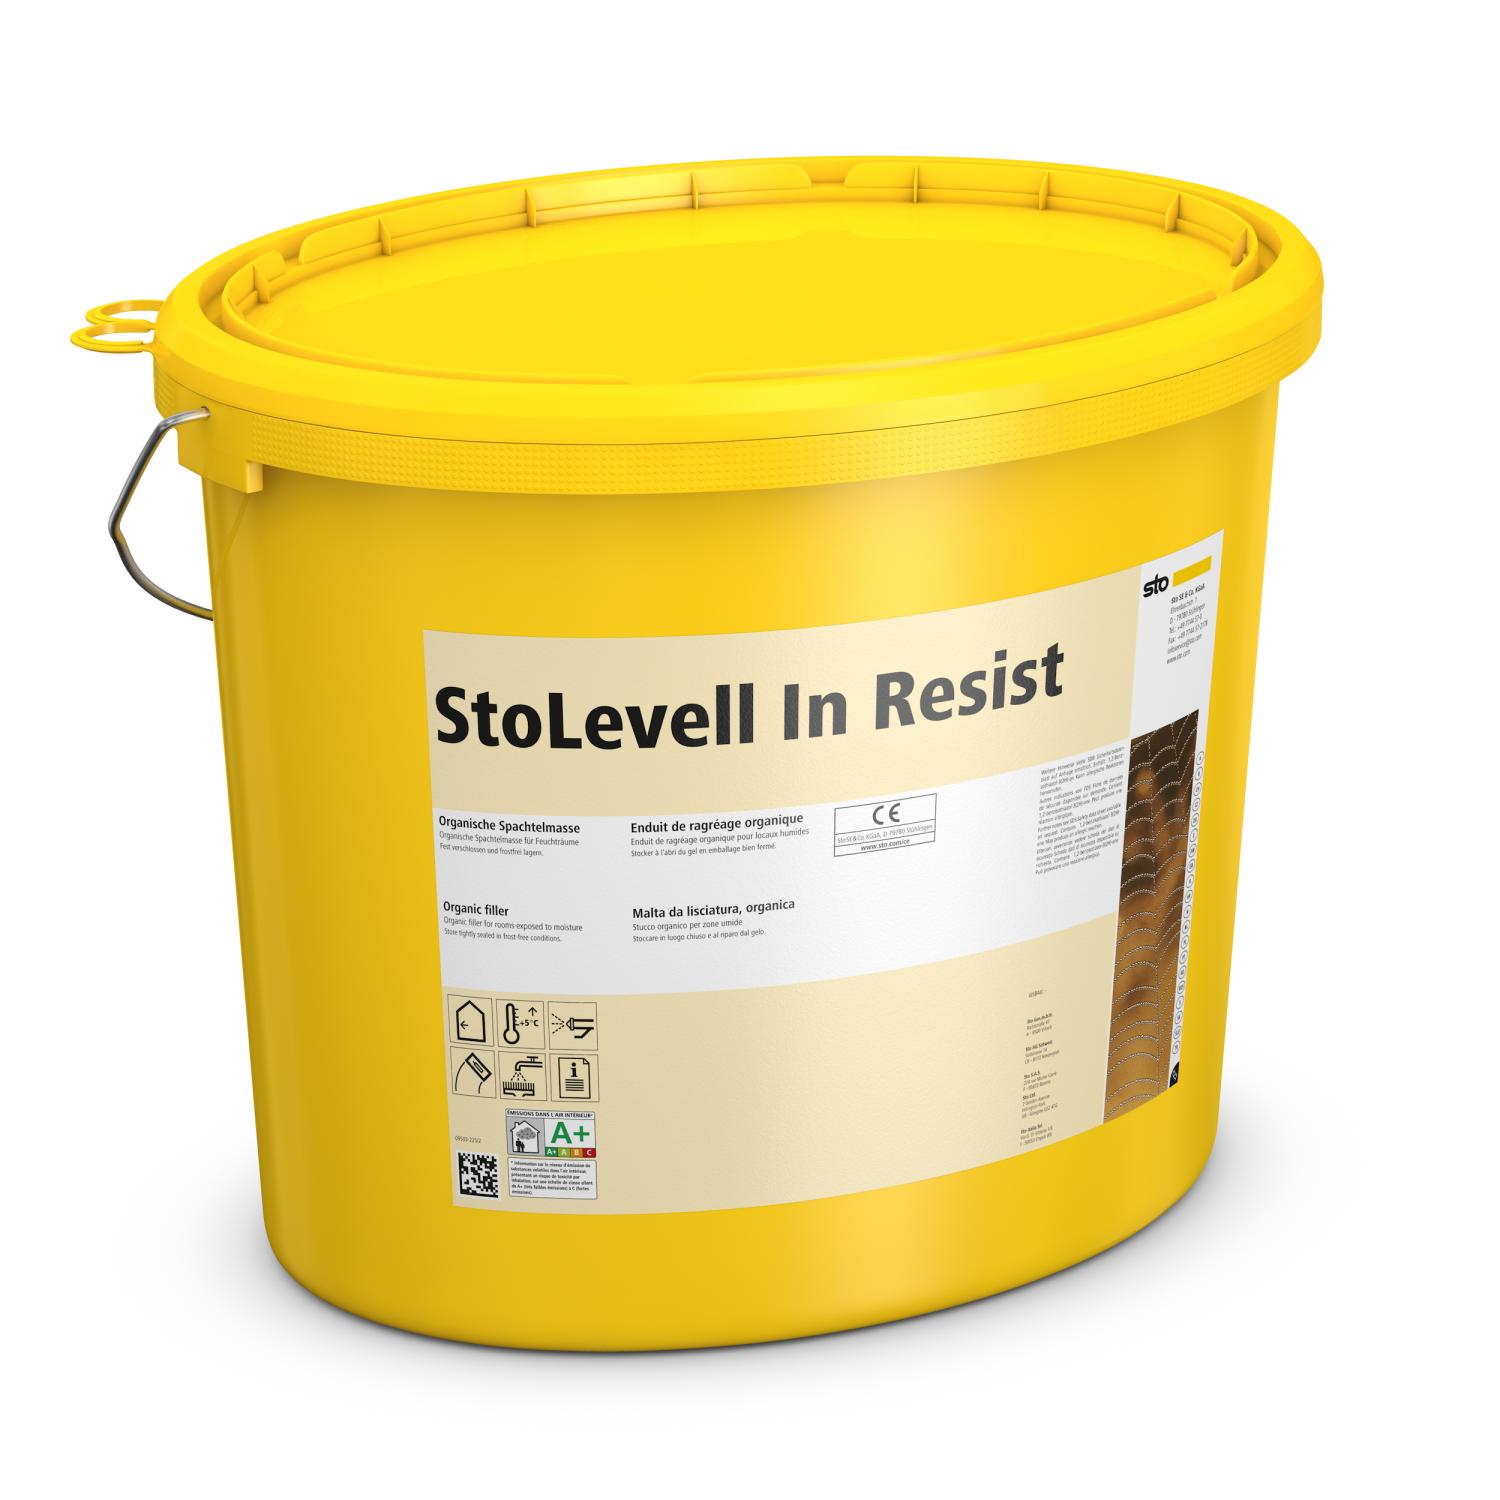 StoLevell In Resist